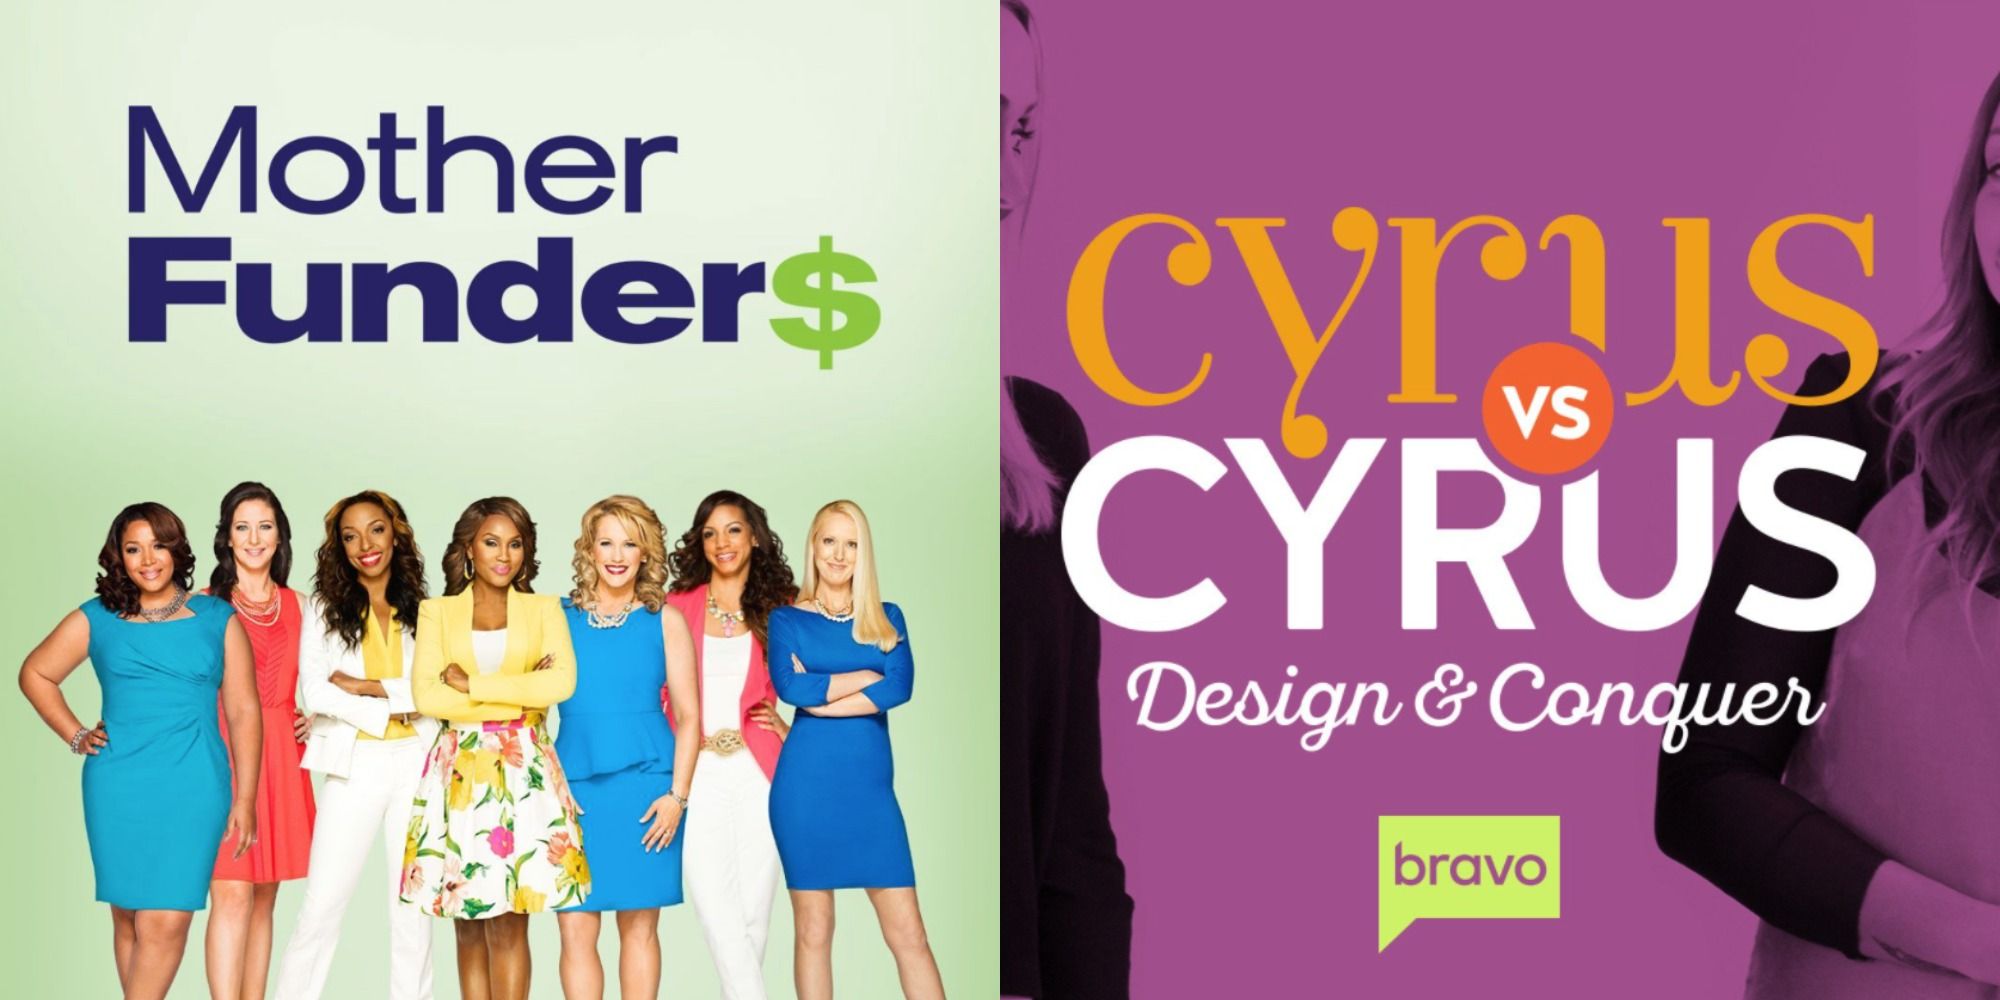 Two side by side images of Mother Funders and Cyrus vs Cyrus title screen